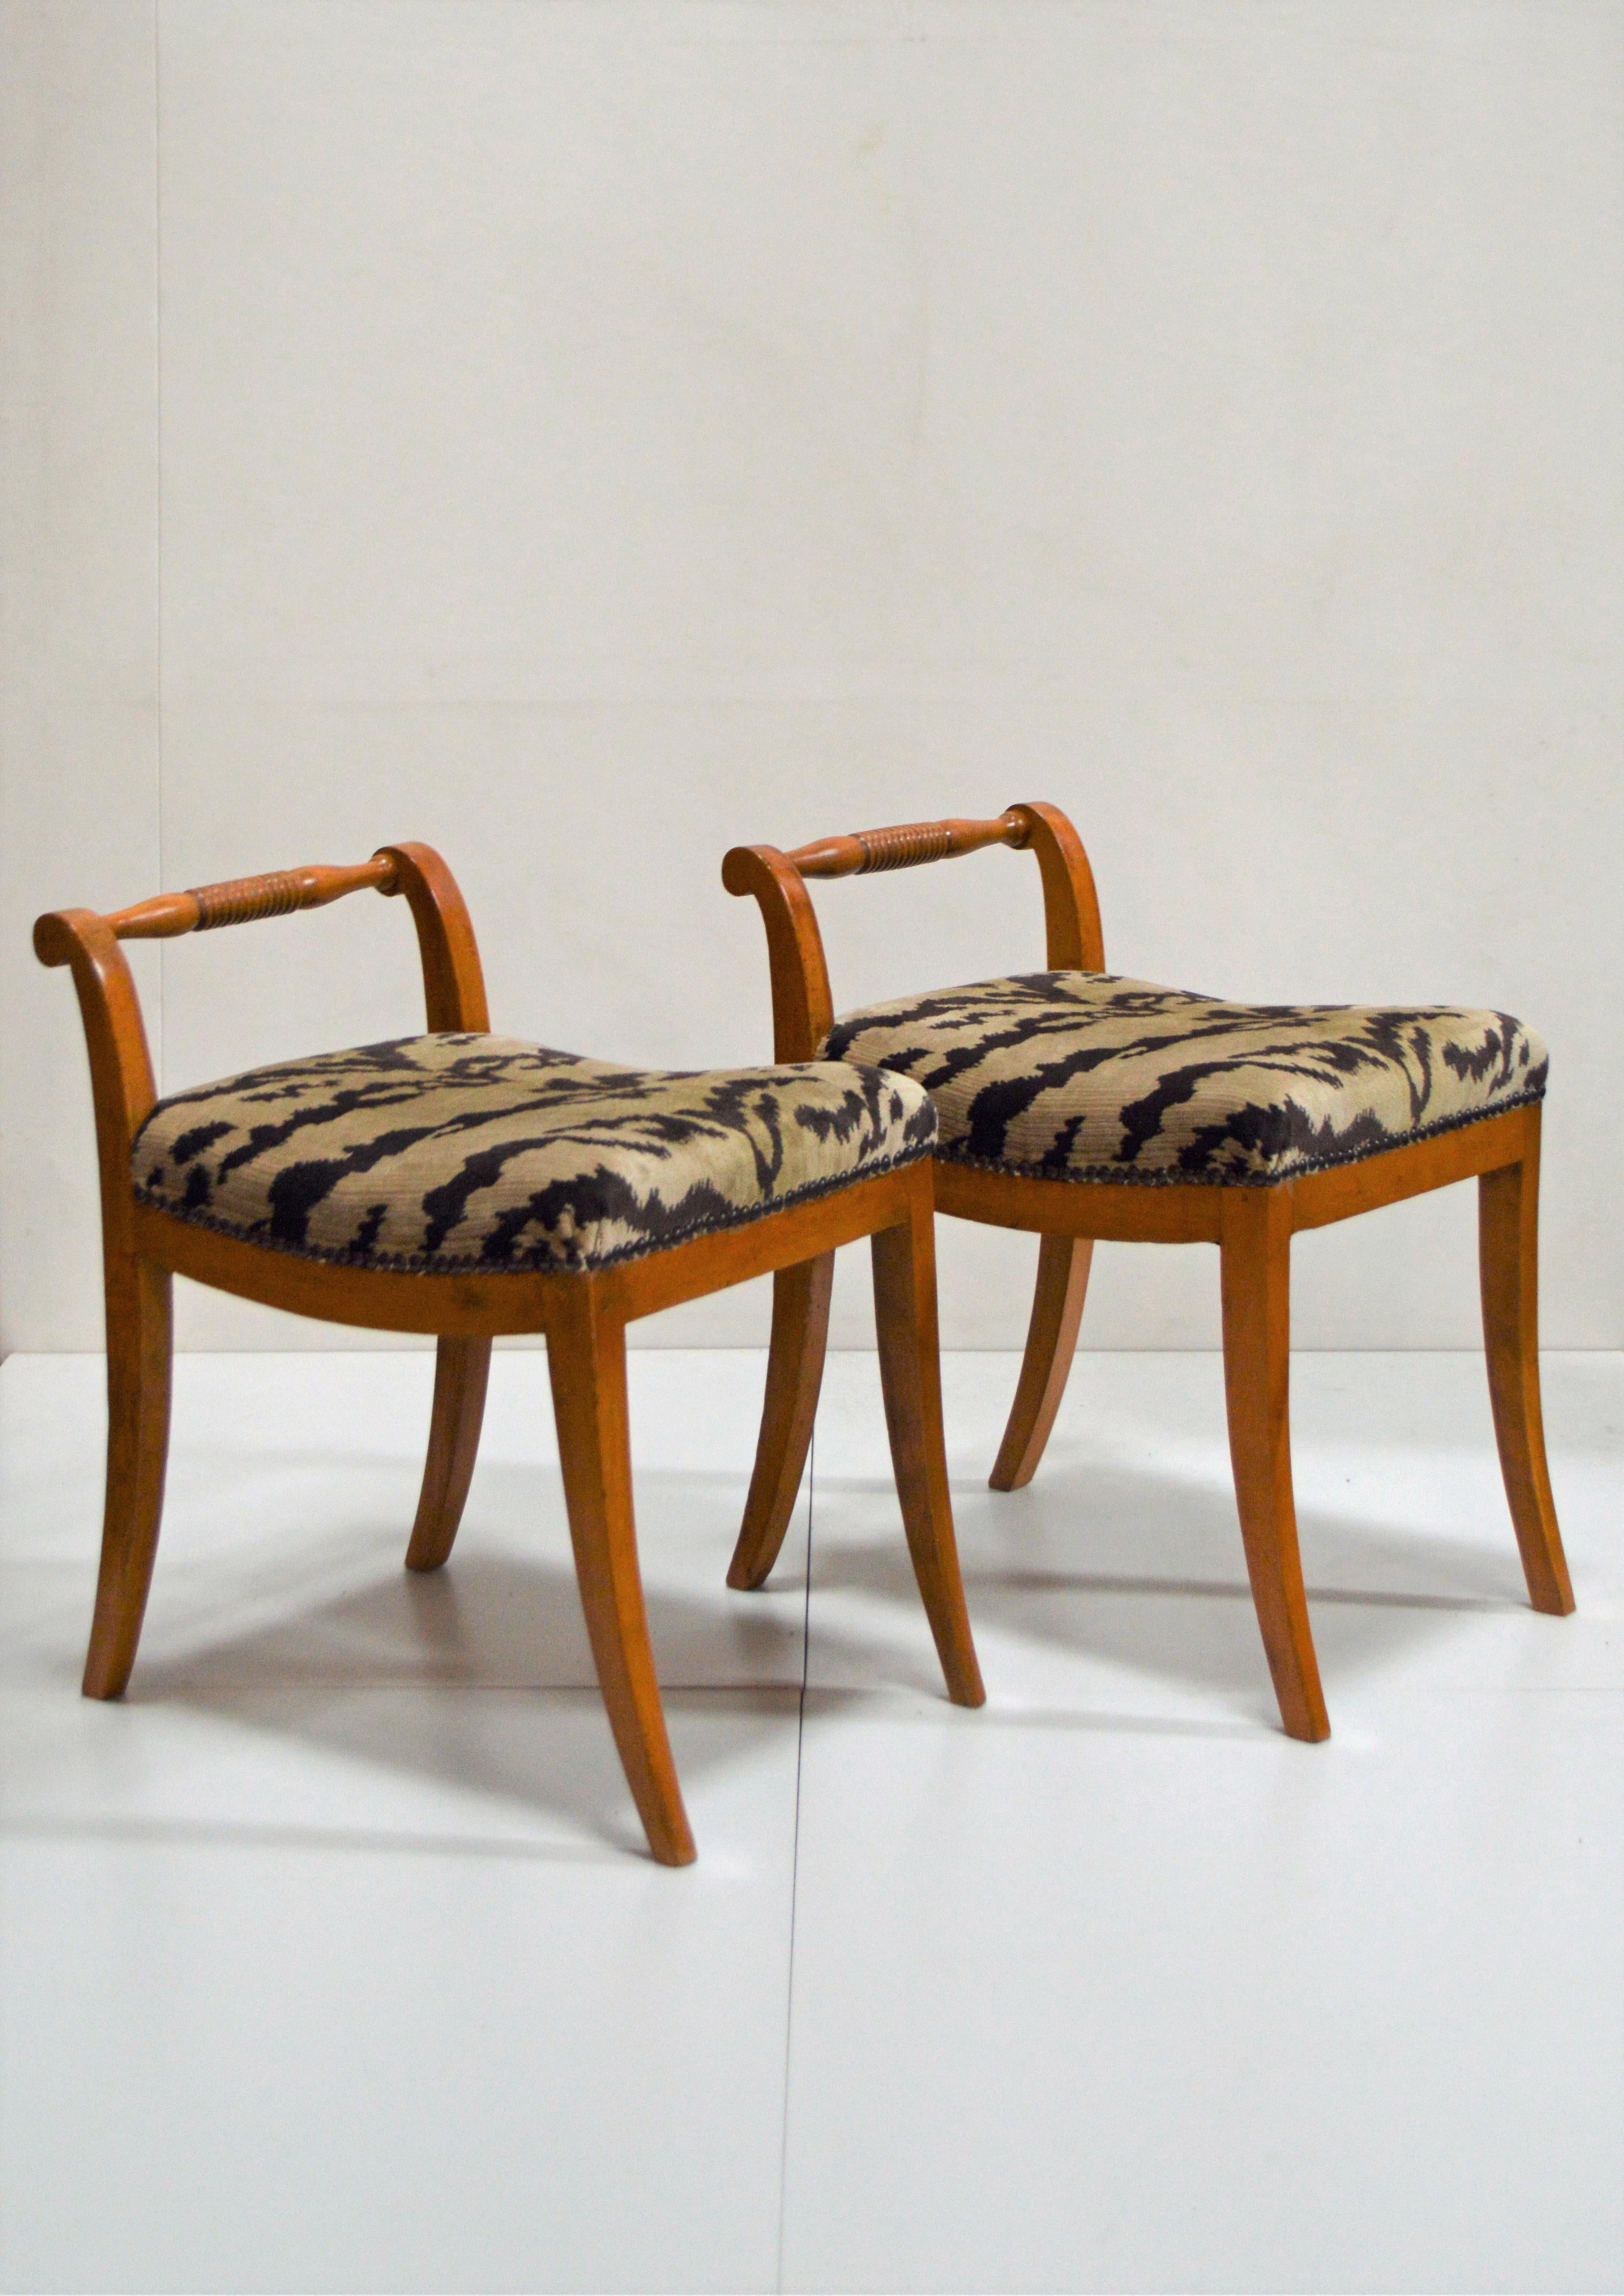 Delightful Karl Johan (Biedermeier) Revival petite benchs or stools upholstered in luxurious tiger stripe silk velvet with nailhead trim. The finish has mellowed to a rich amber color which has been touched up but not altered in color. The joints